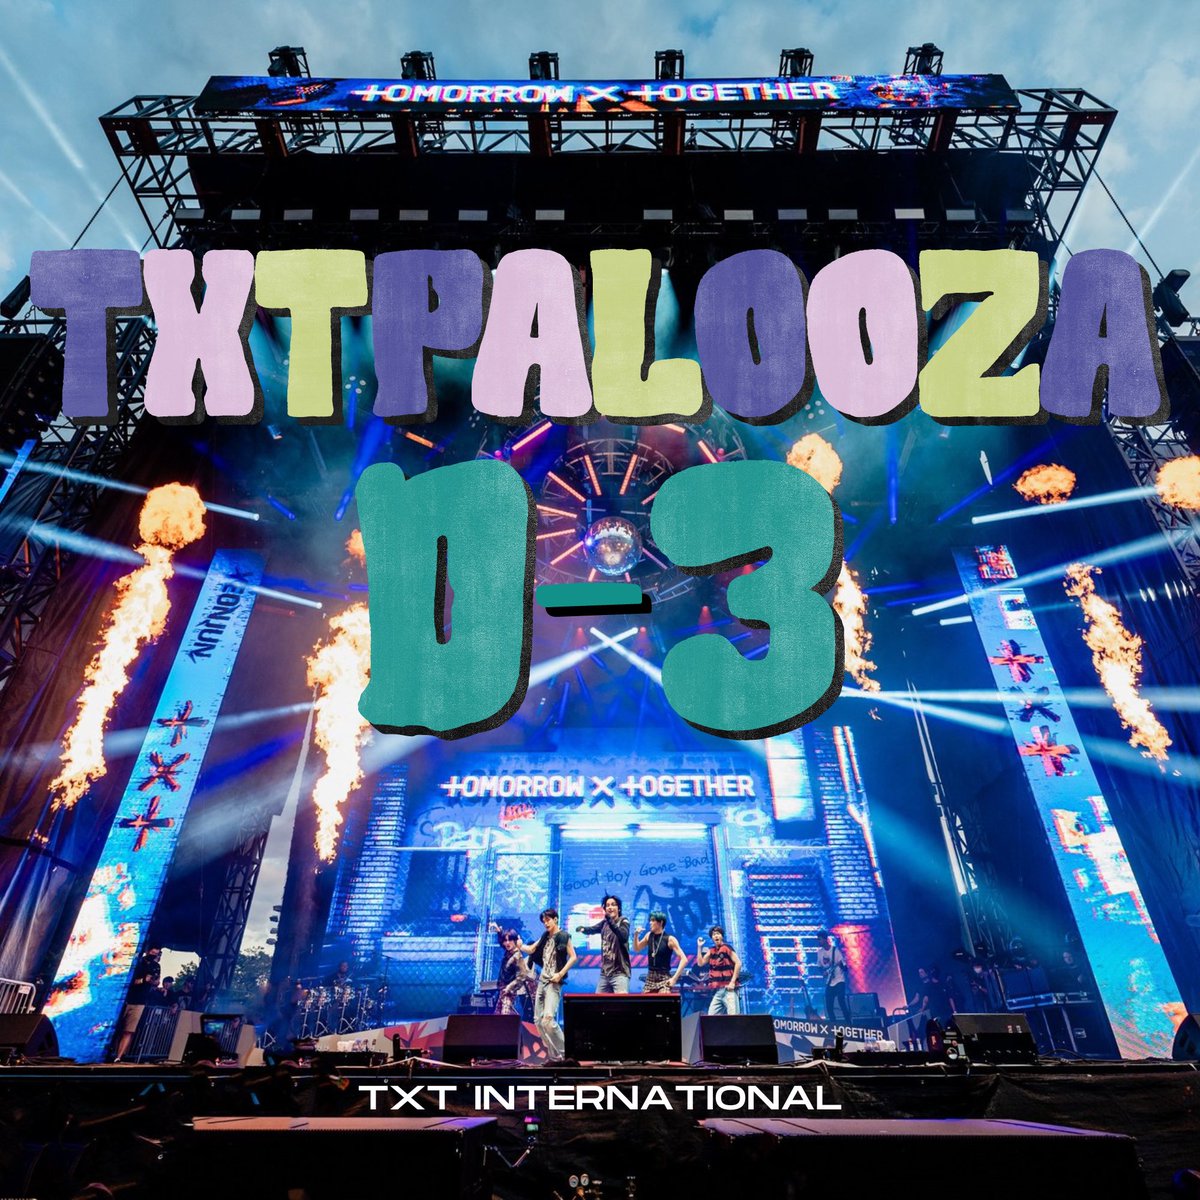 NOTICE | 230802 TXT is all set to headline Lollapalooza as the First K-pop group on August 6th (KST)!🔥 Let's countdown to the D-DAY with us MOAs at 12:00AM KST tonight!🕛 TXTPALOOZA D-3 #TXTPALOOZA #Lollapalooza #TOMORROW_X_TOGETHER @TXT_bighit @TXT_members